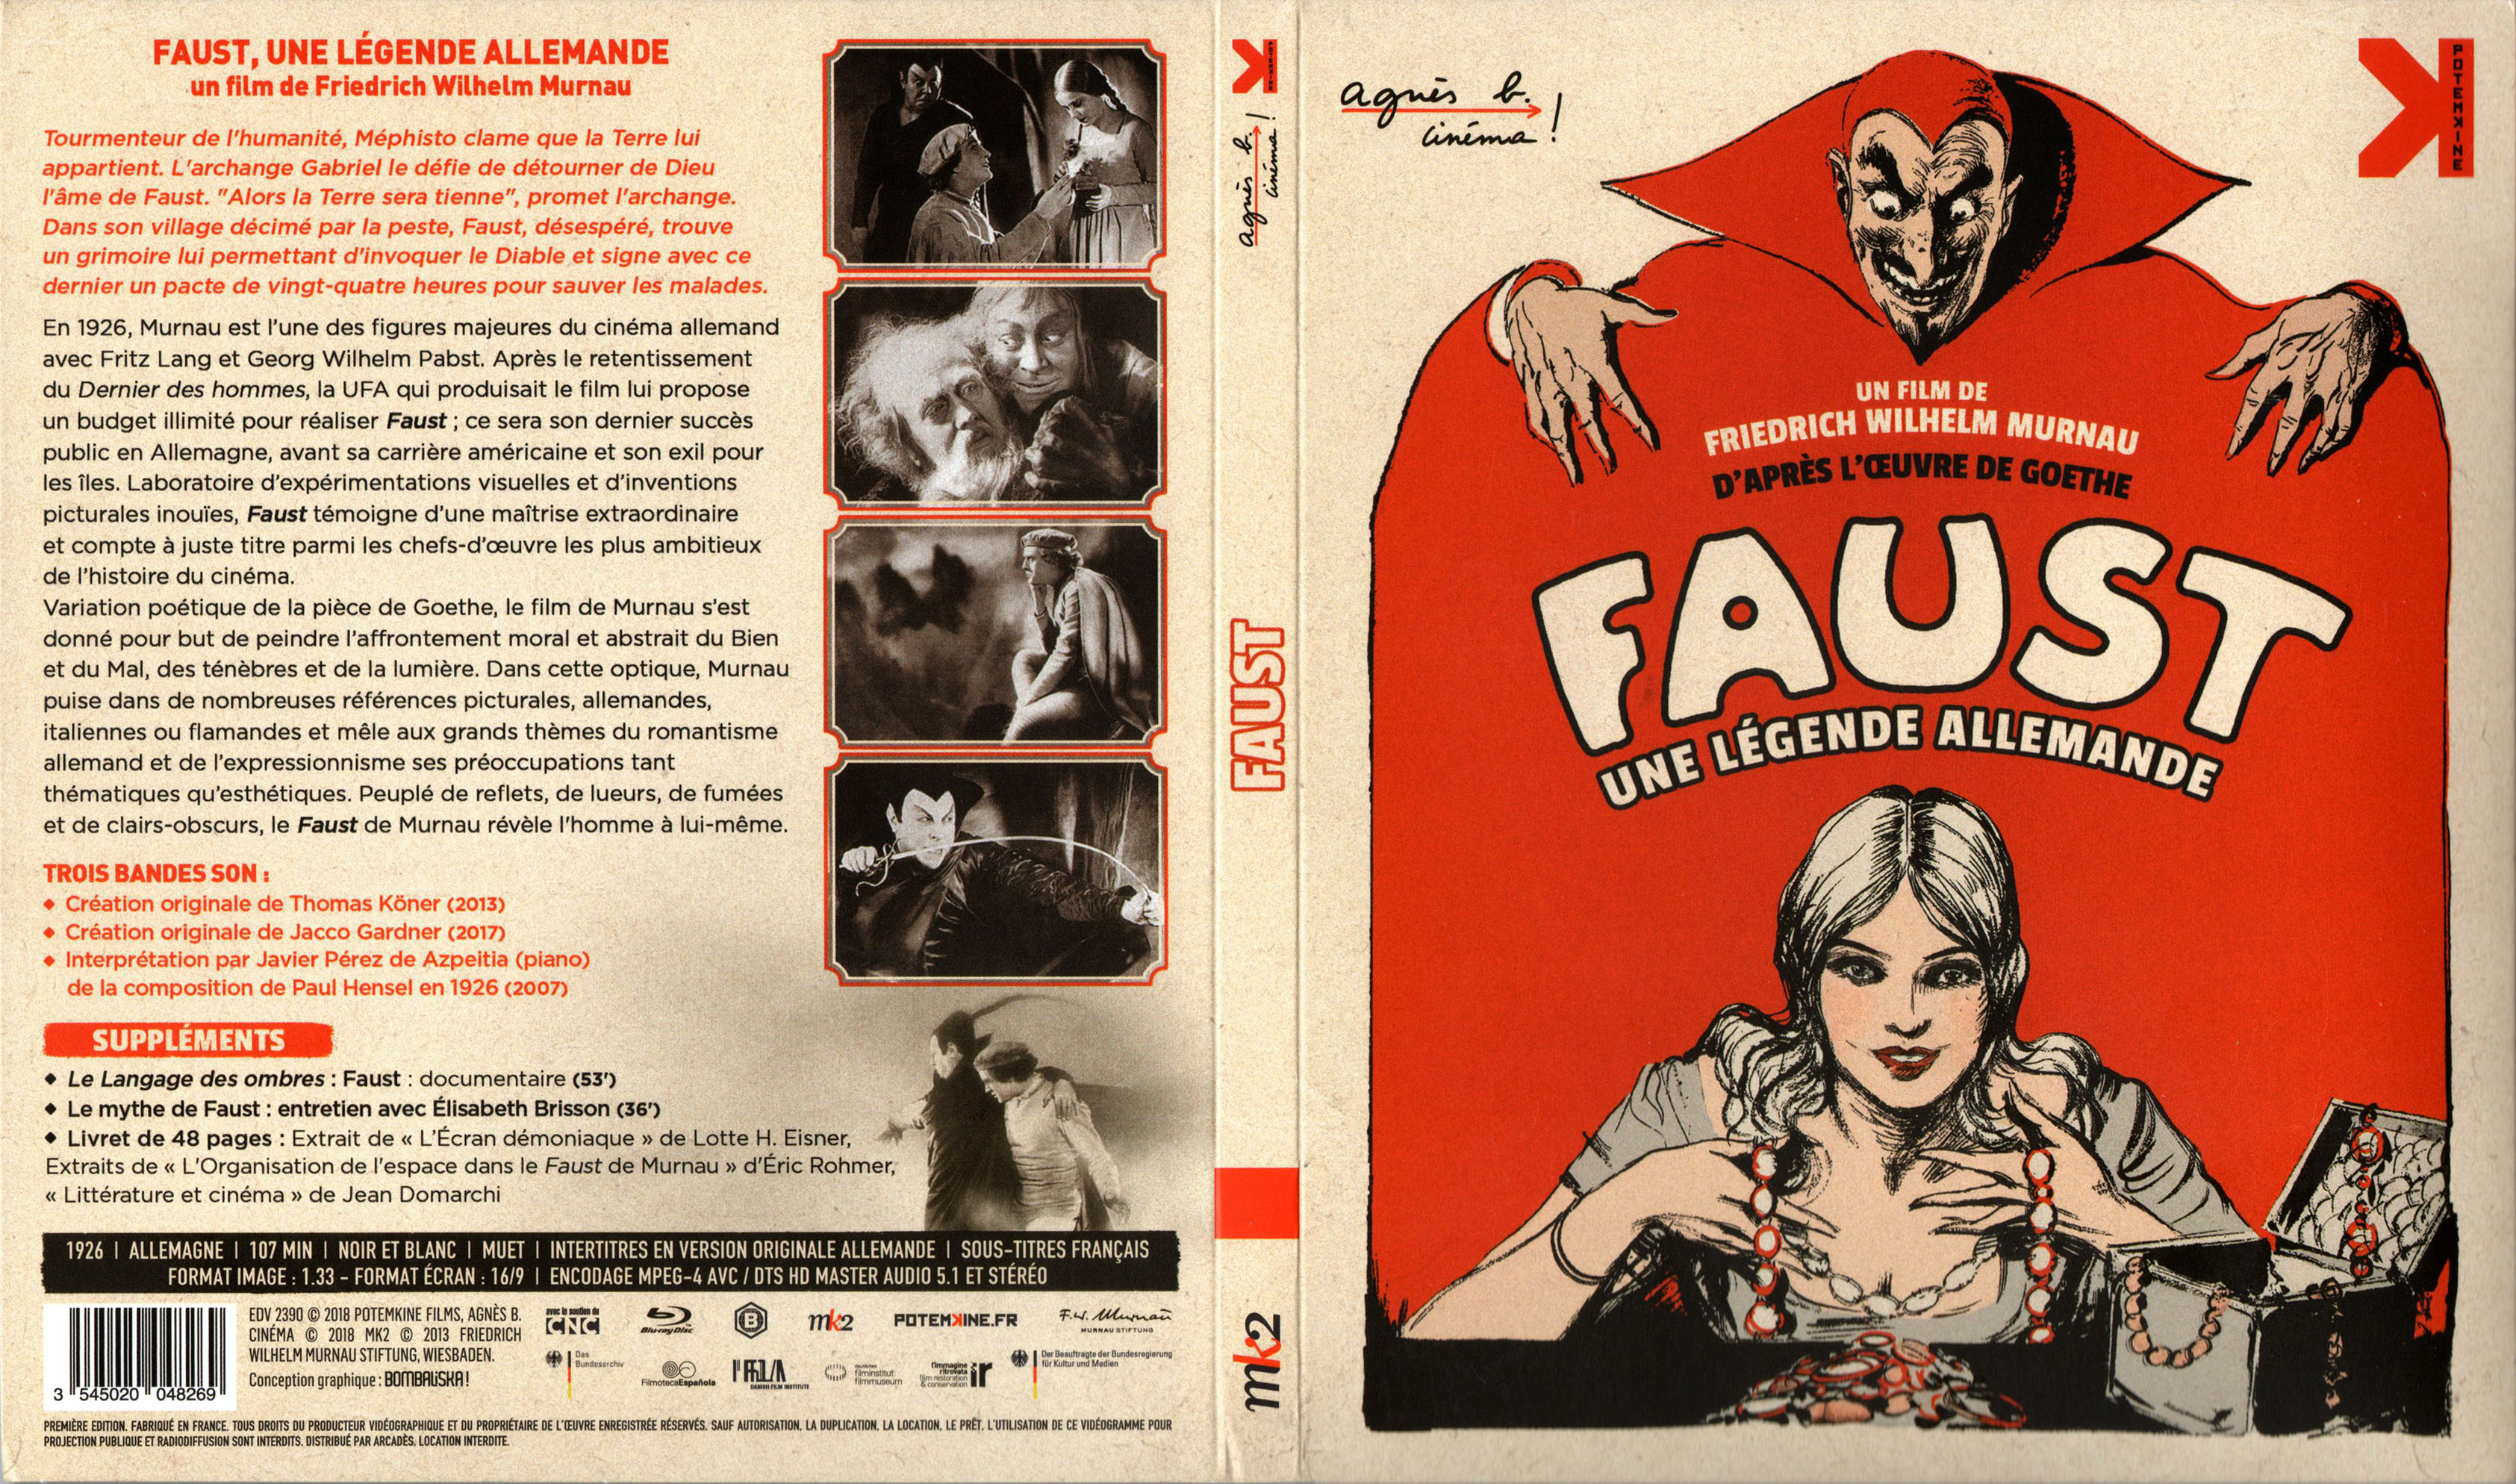 Jaquette DVD Faust (BLU-RAY)